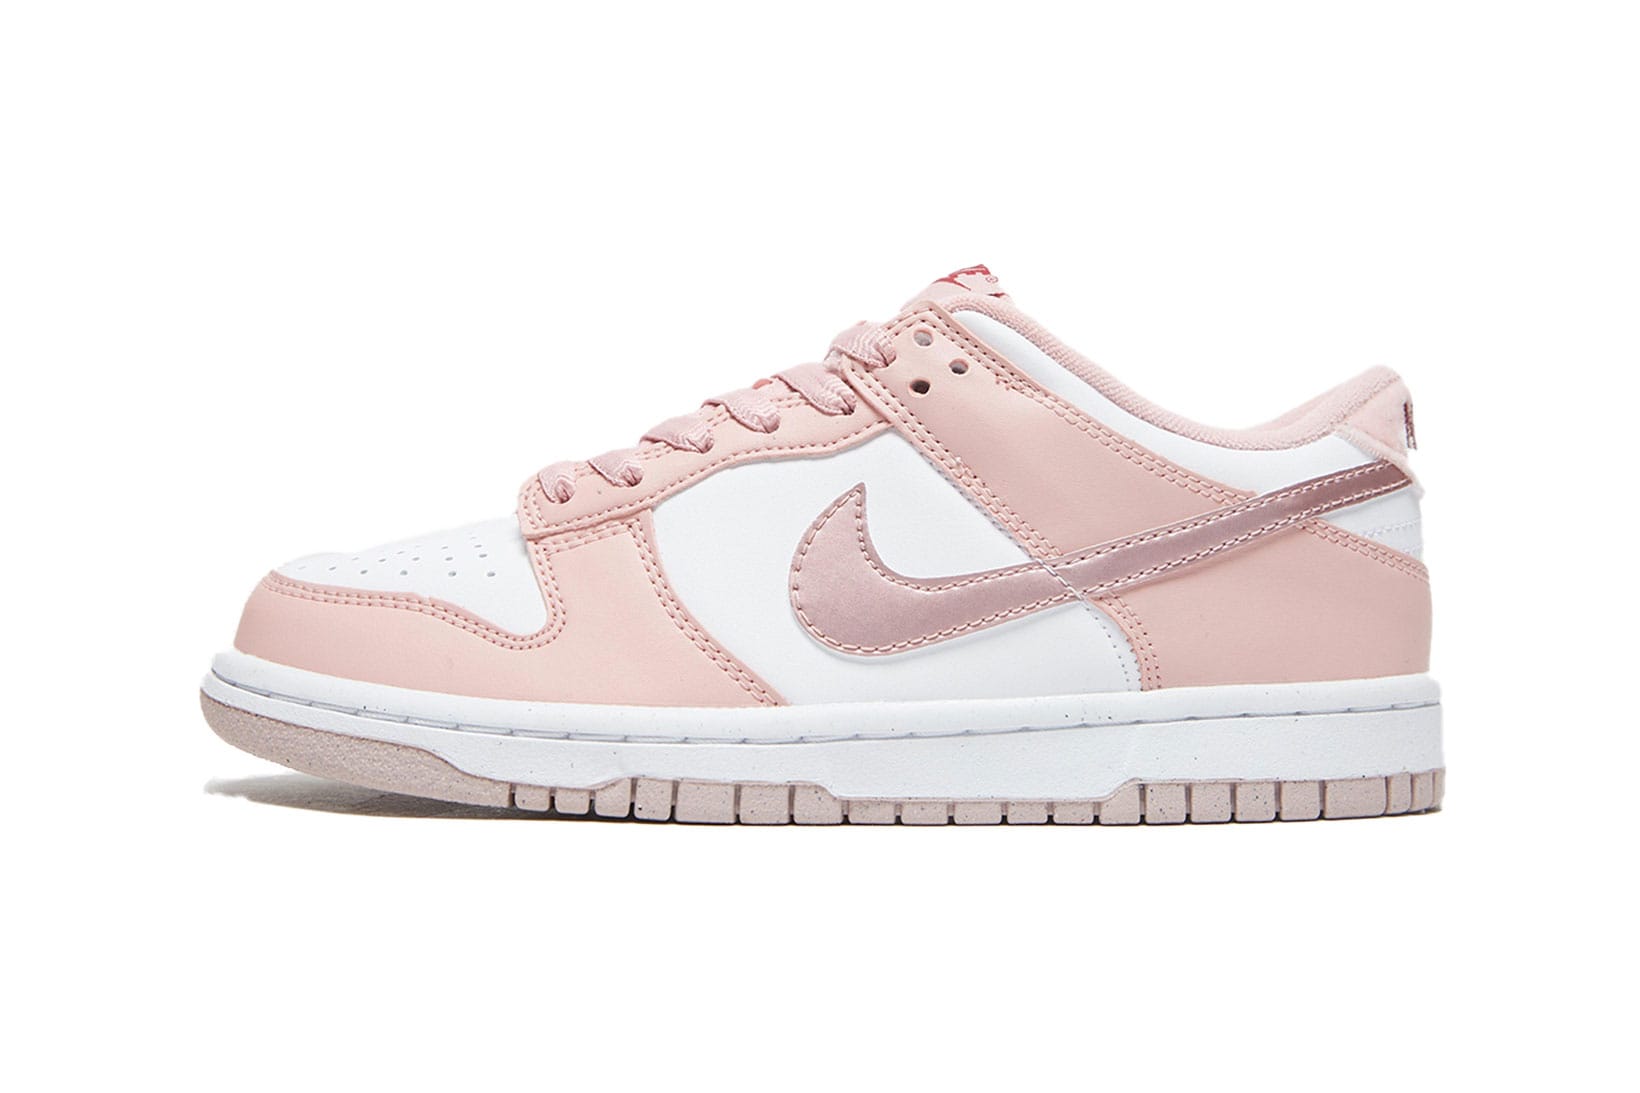 Nike to Drop Dunk Low “Pink Velvet” for 